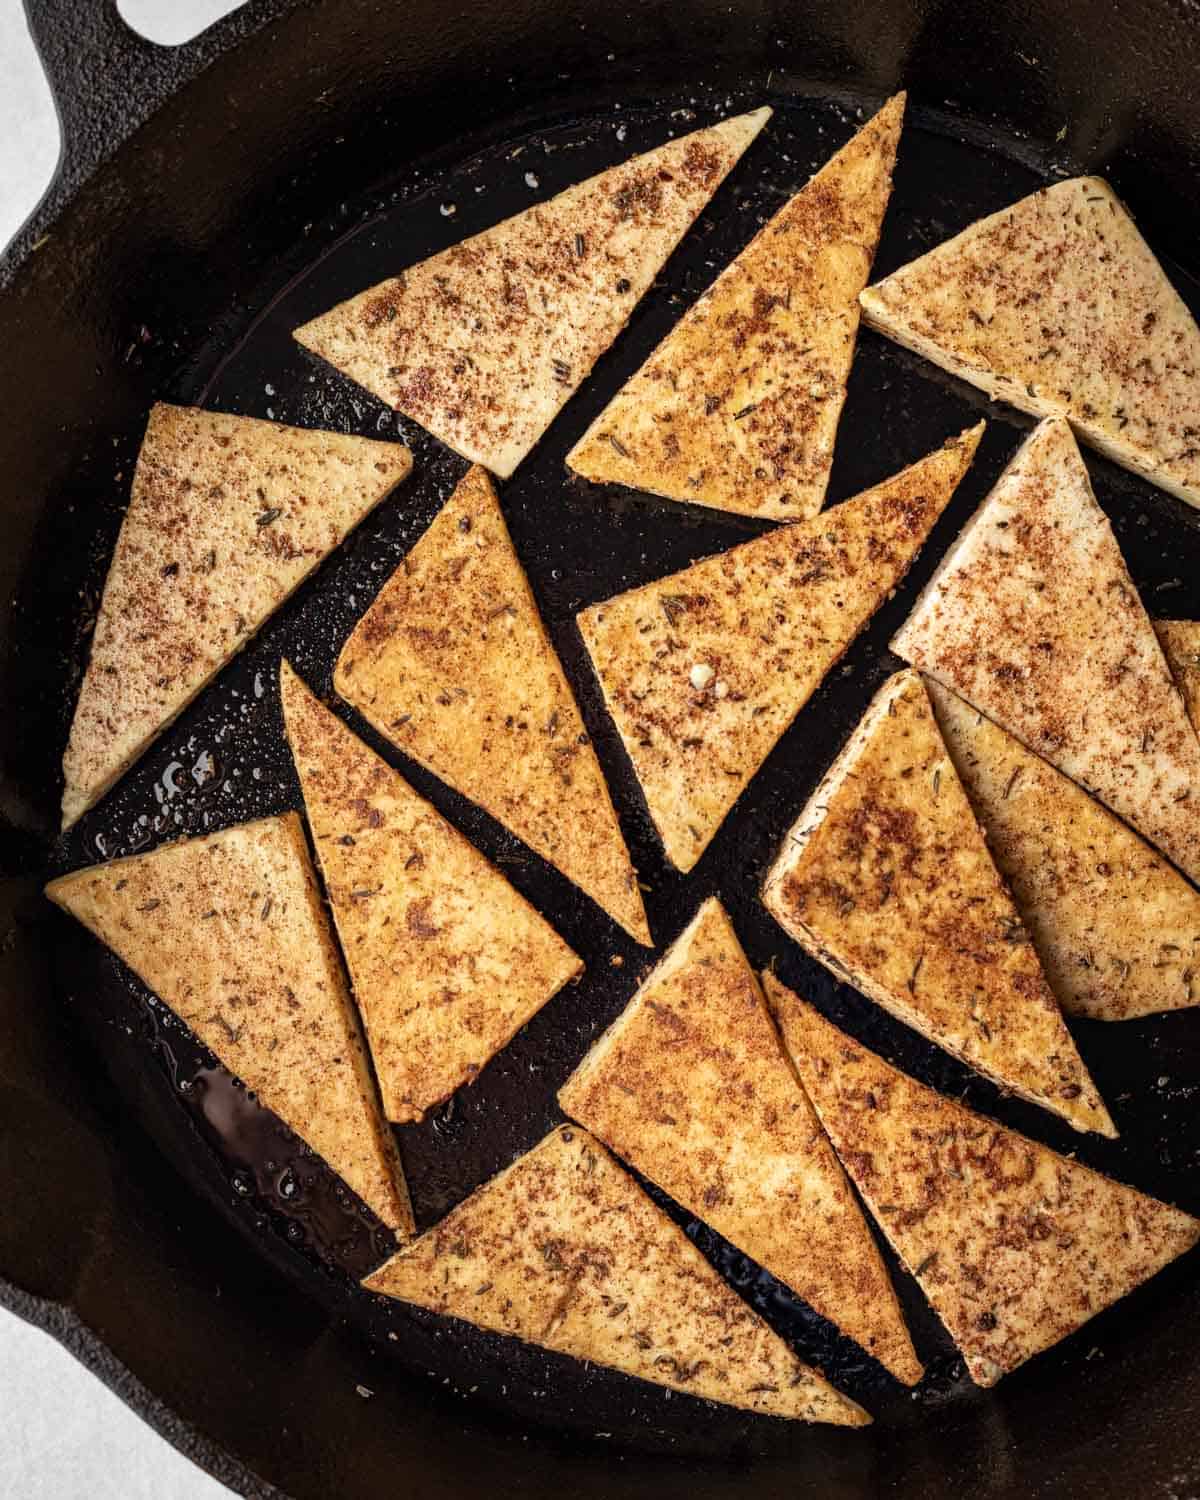 Tofu coated in a dry spice rub is seared in a large cast iron skillet.